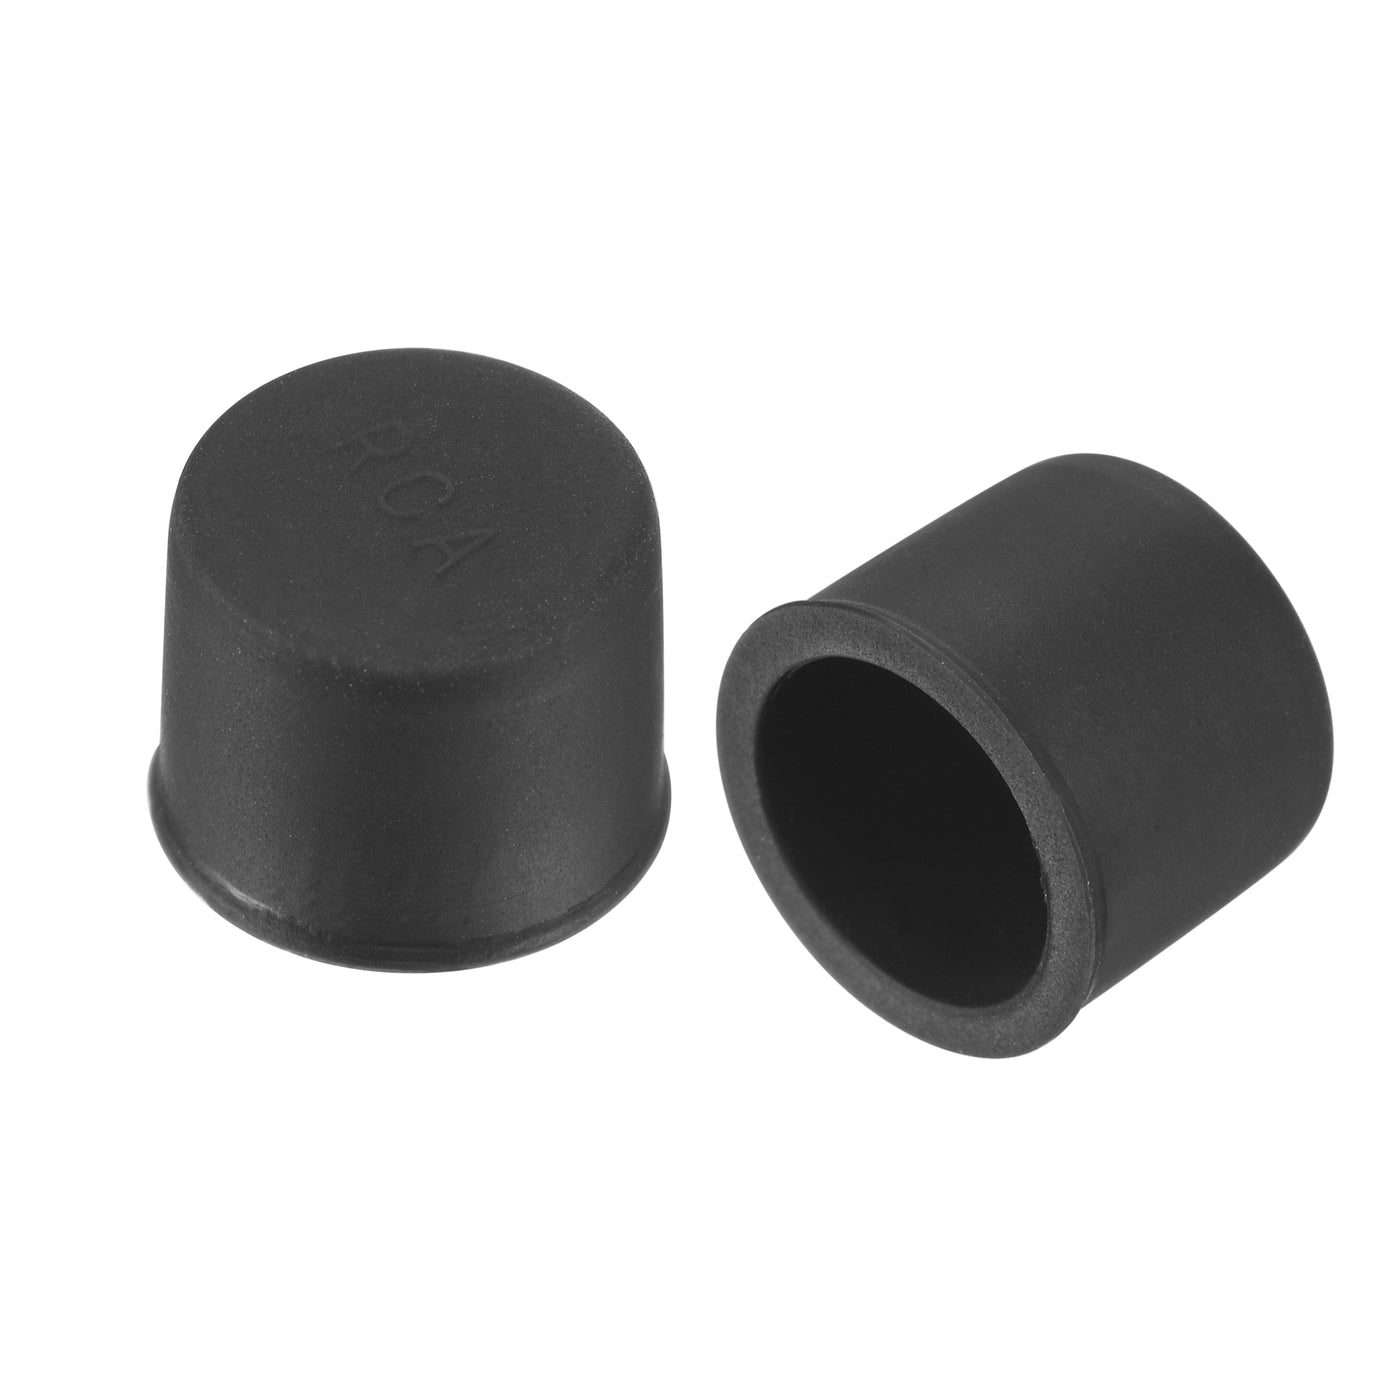 uxcell Uxcell 30pcs Silicone RCA Port Anti-Dust Stopper Cap Cover Black